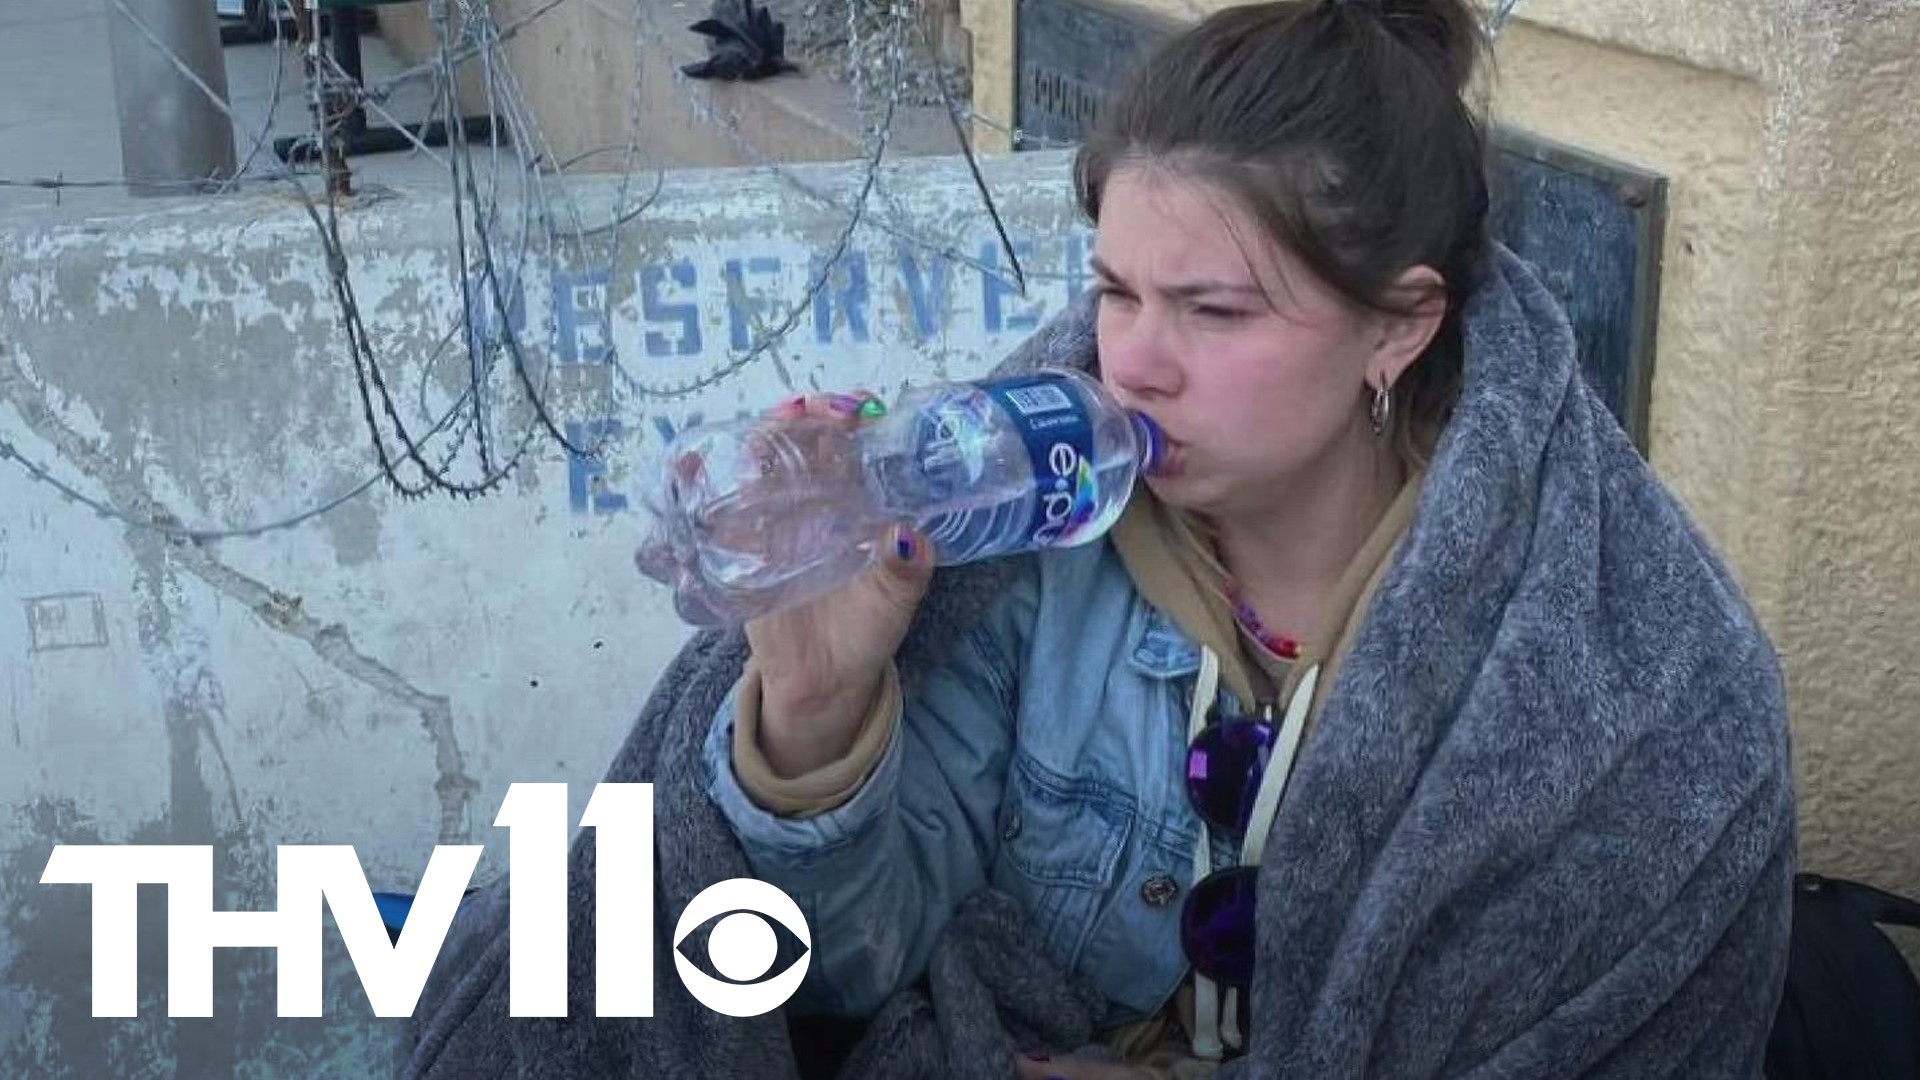 25-year-old Natalia Poliakova is sharing her journey from Ukraine to Arkansas to hopefully help other refugees as they travel looking for a new place to live.